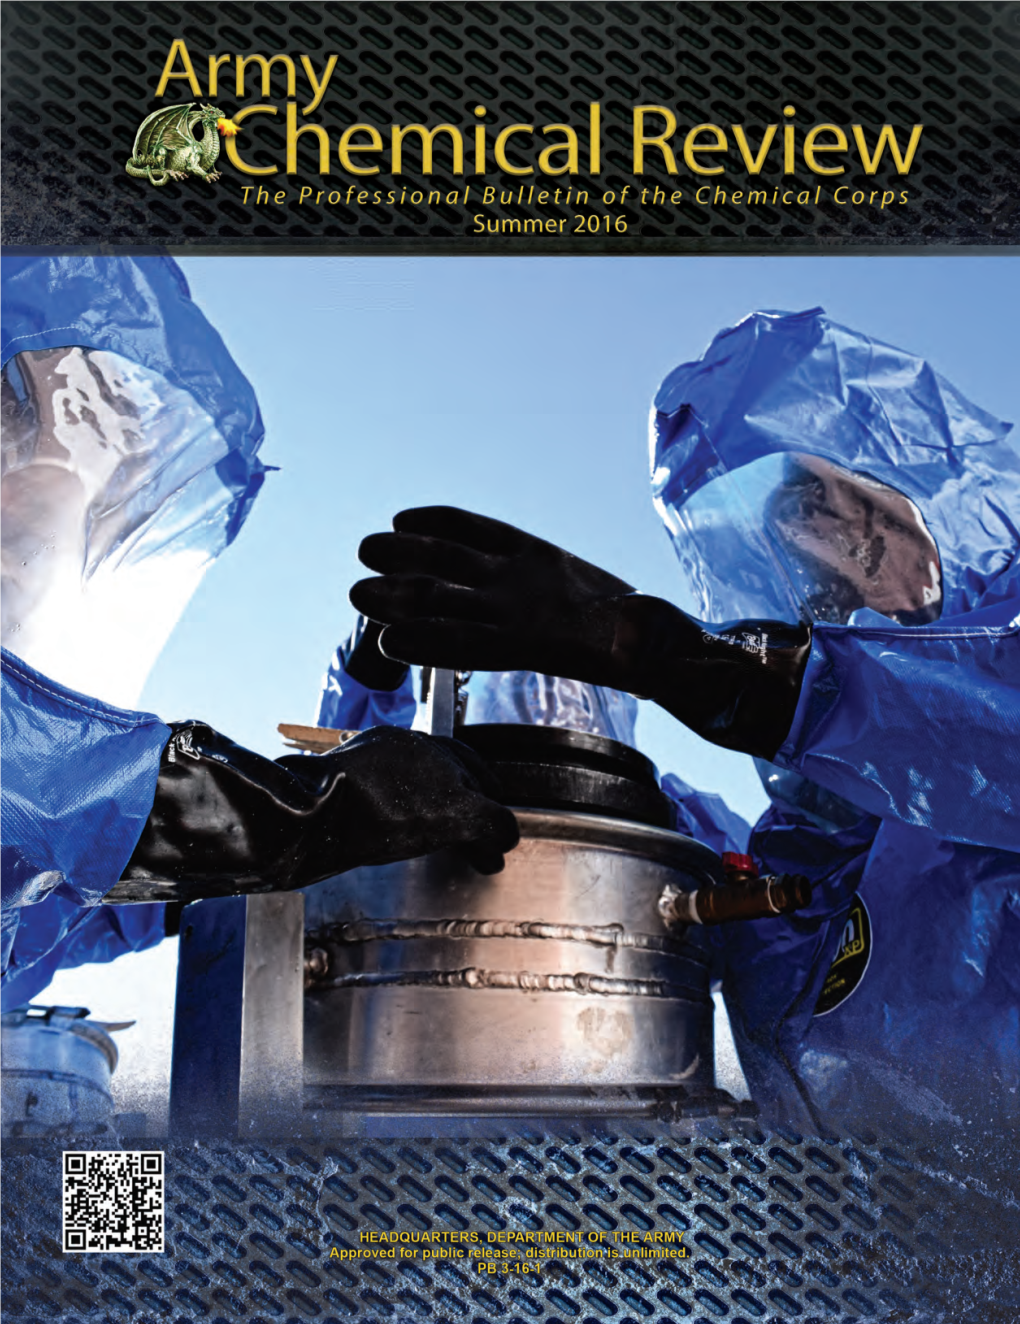 Army Chemical Review (ACR) (ISSN 0899-7047) (573) XXX-XXXX Is Published Biannually in June and December by the DSN 676-XXXX (563 Prefix) Or 581-XXXX (596 Prefix) U.S